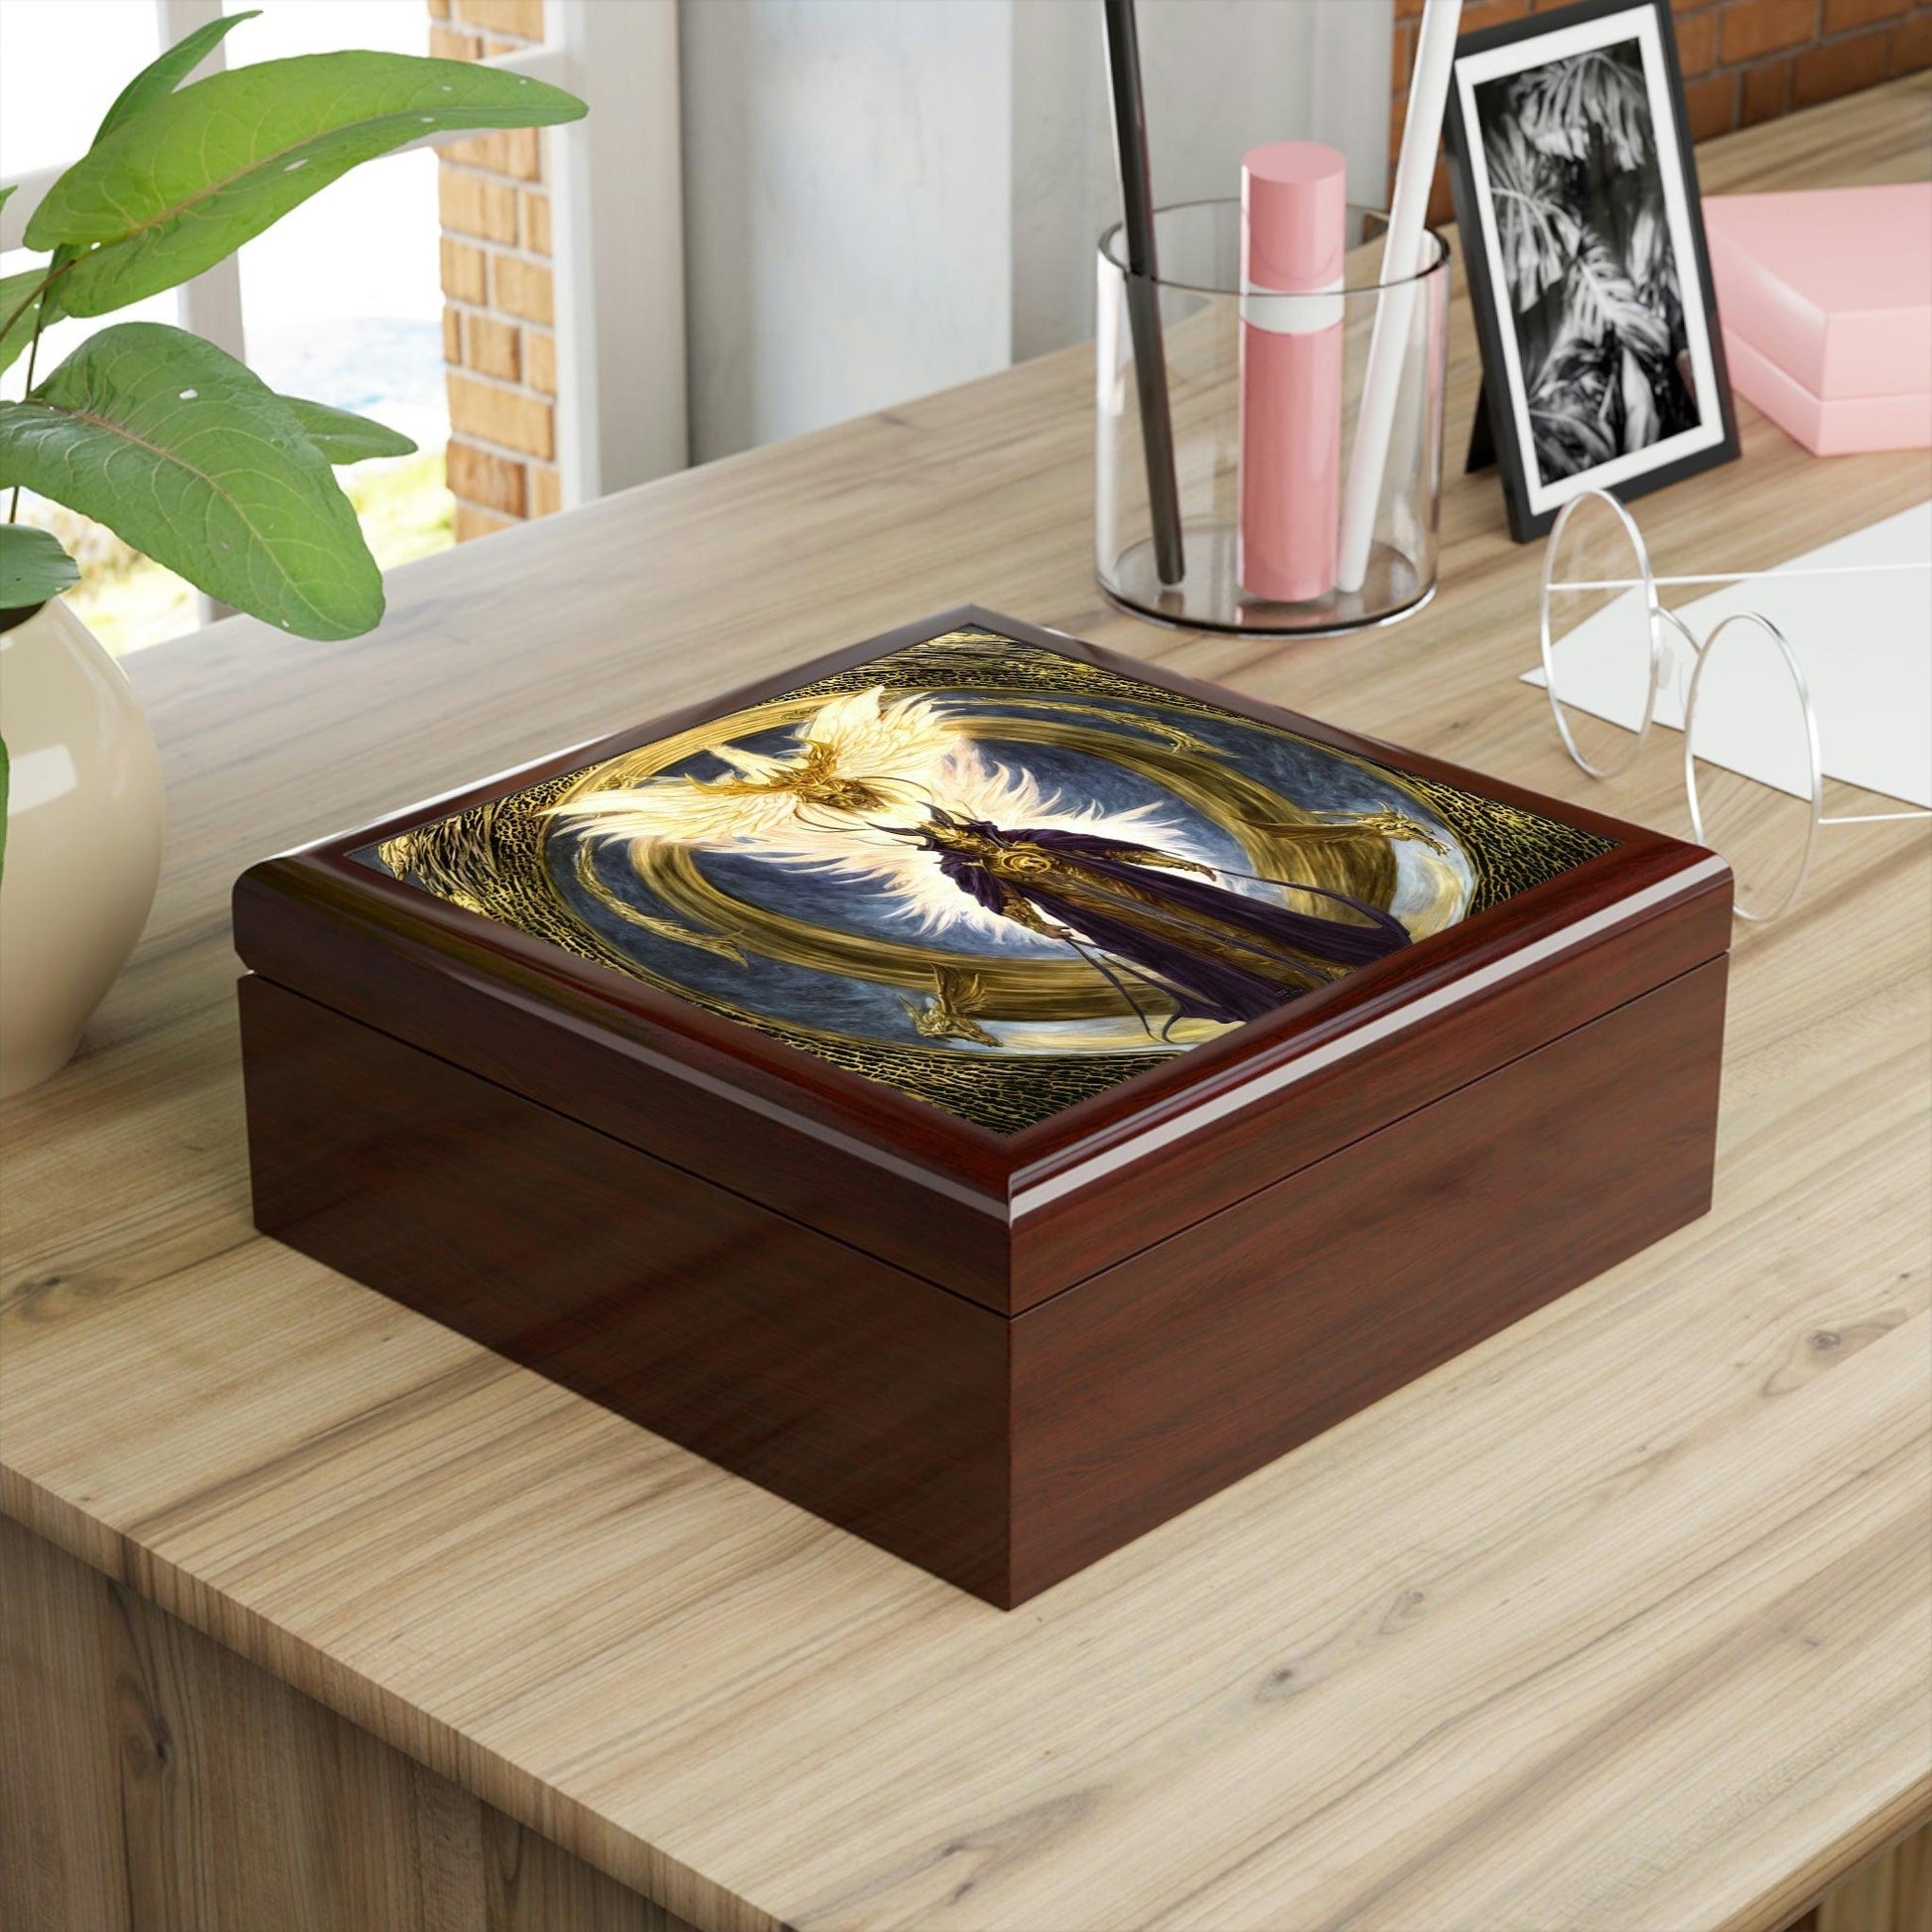 Lucifers-Jewelry-Box-to-store-your-talismans-and-rings-8